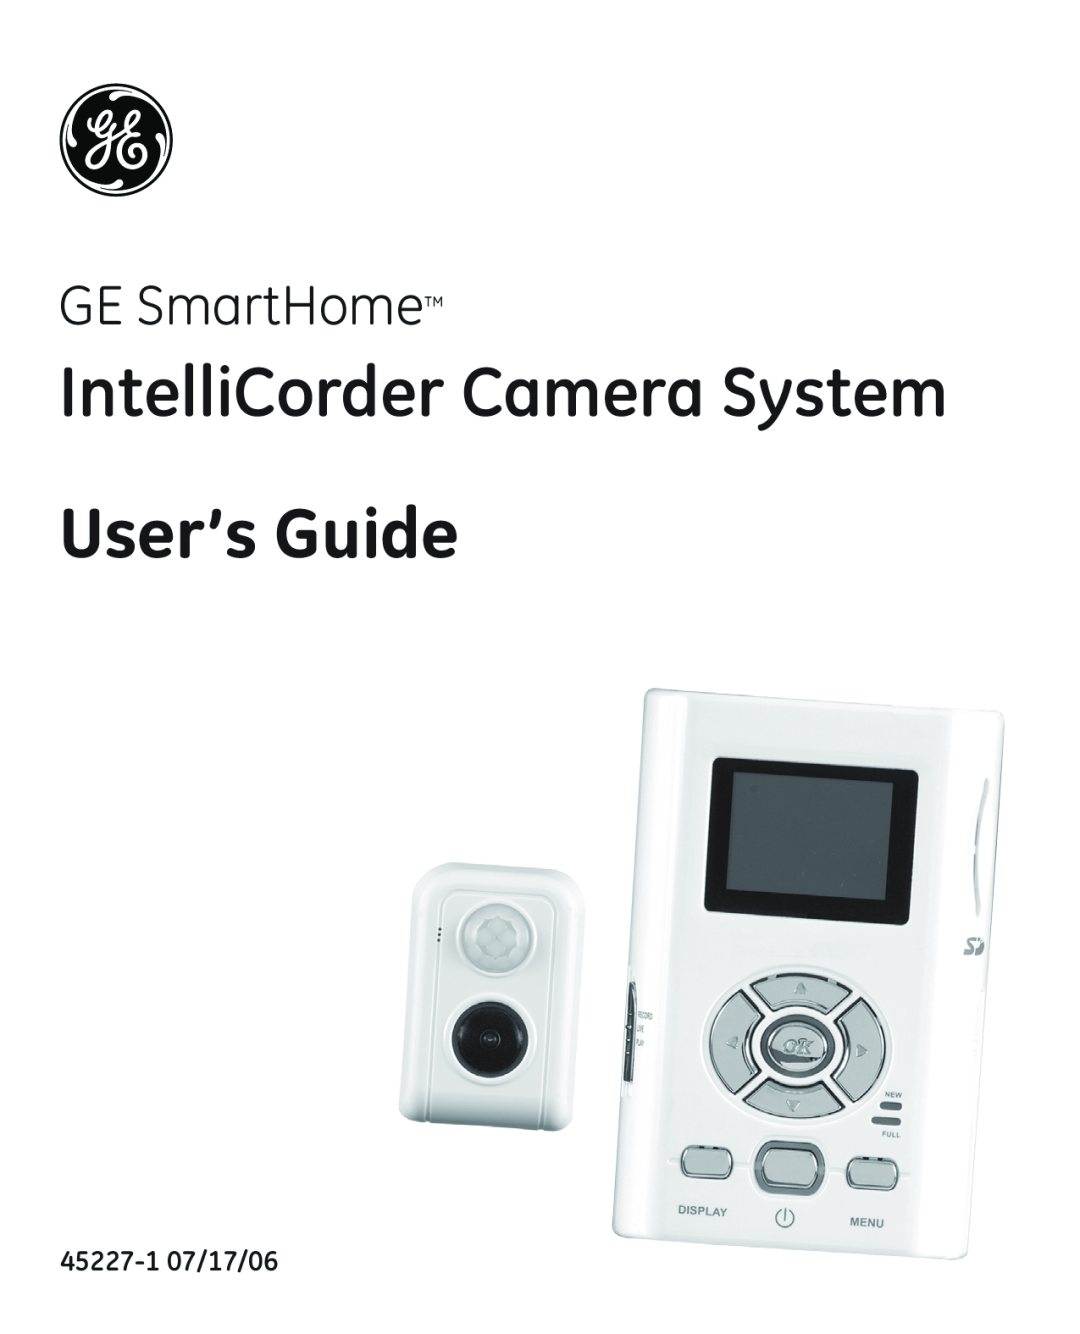 GE manual IntelliCorder Camera System User’s Guide, GE SmartHome, 45227-107/17/06 